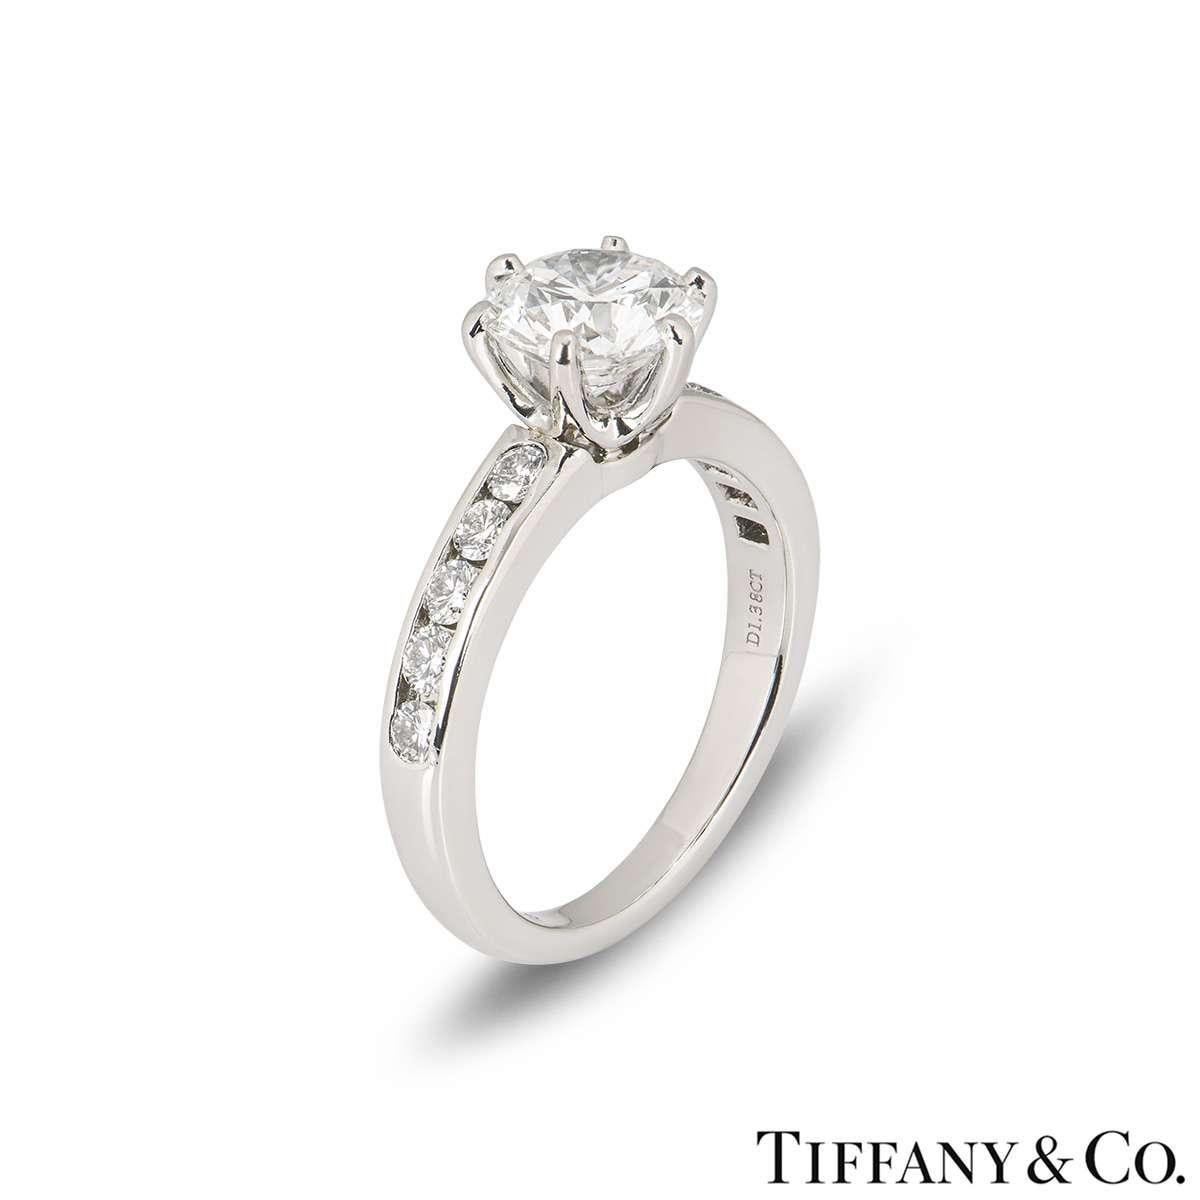 An elegant platinum diamond ring by Tiffany & Co. from the Setting collection. The ring comprises of a round brilliant cut diamond in a prong setting with a weight of 1.38ct, G colour and VVS2 clarity. The diamond scores an excellent rating in all